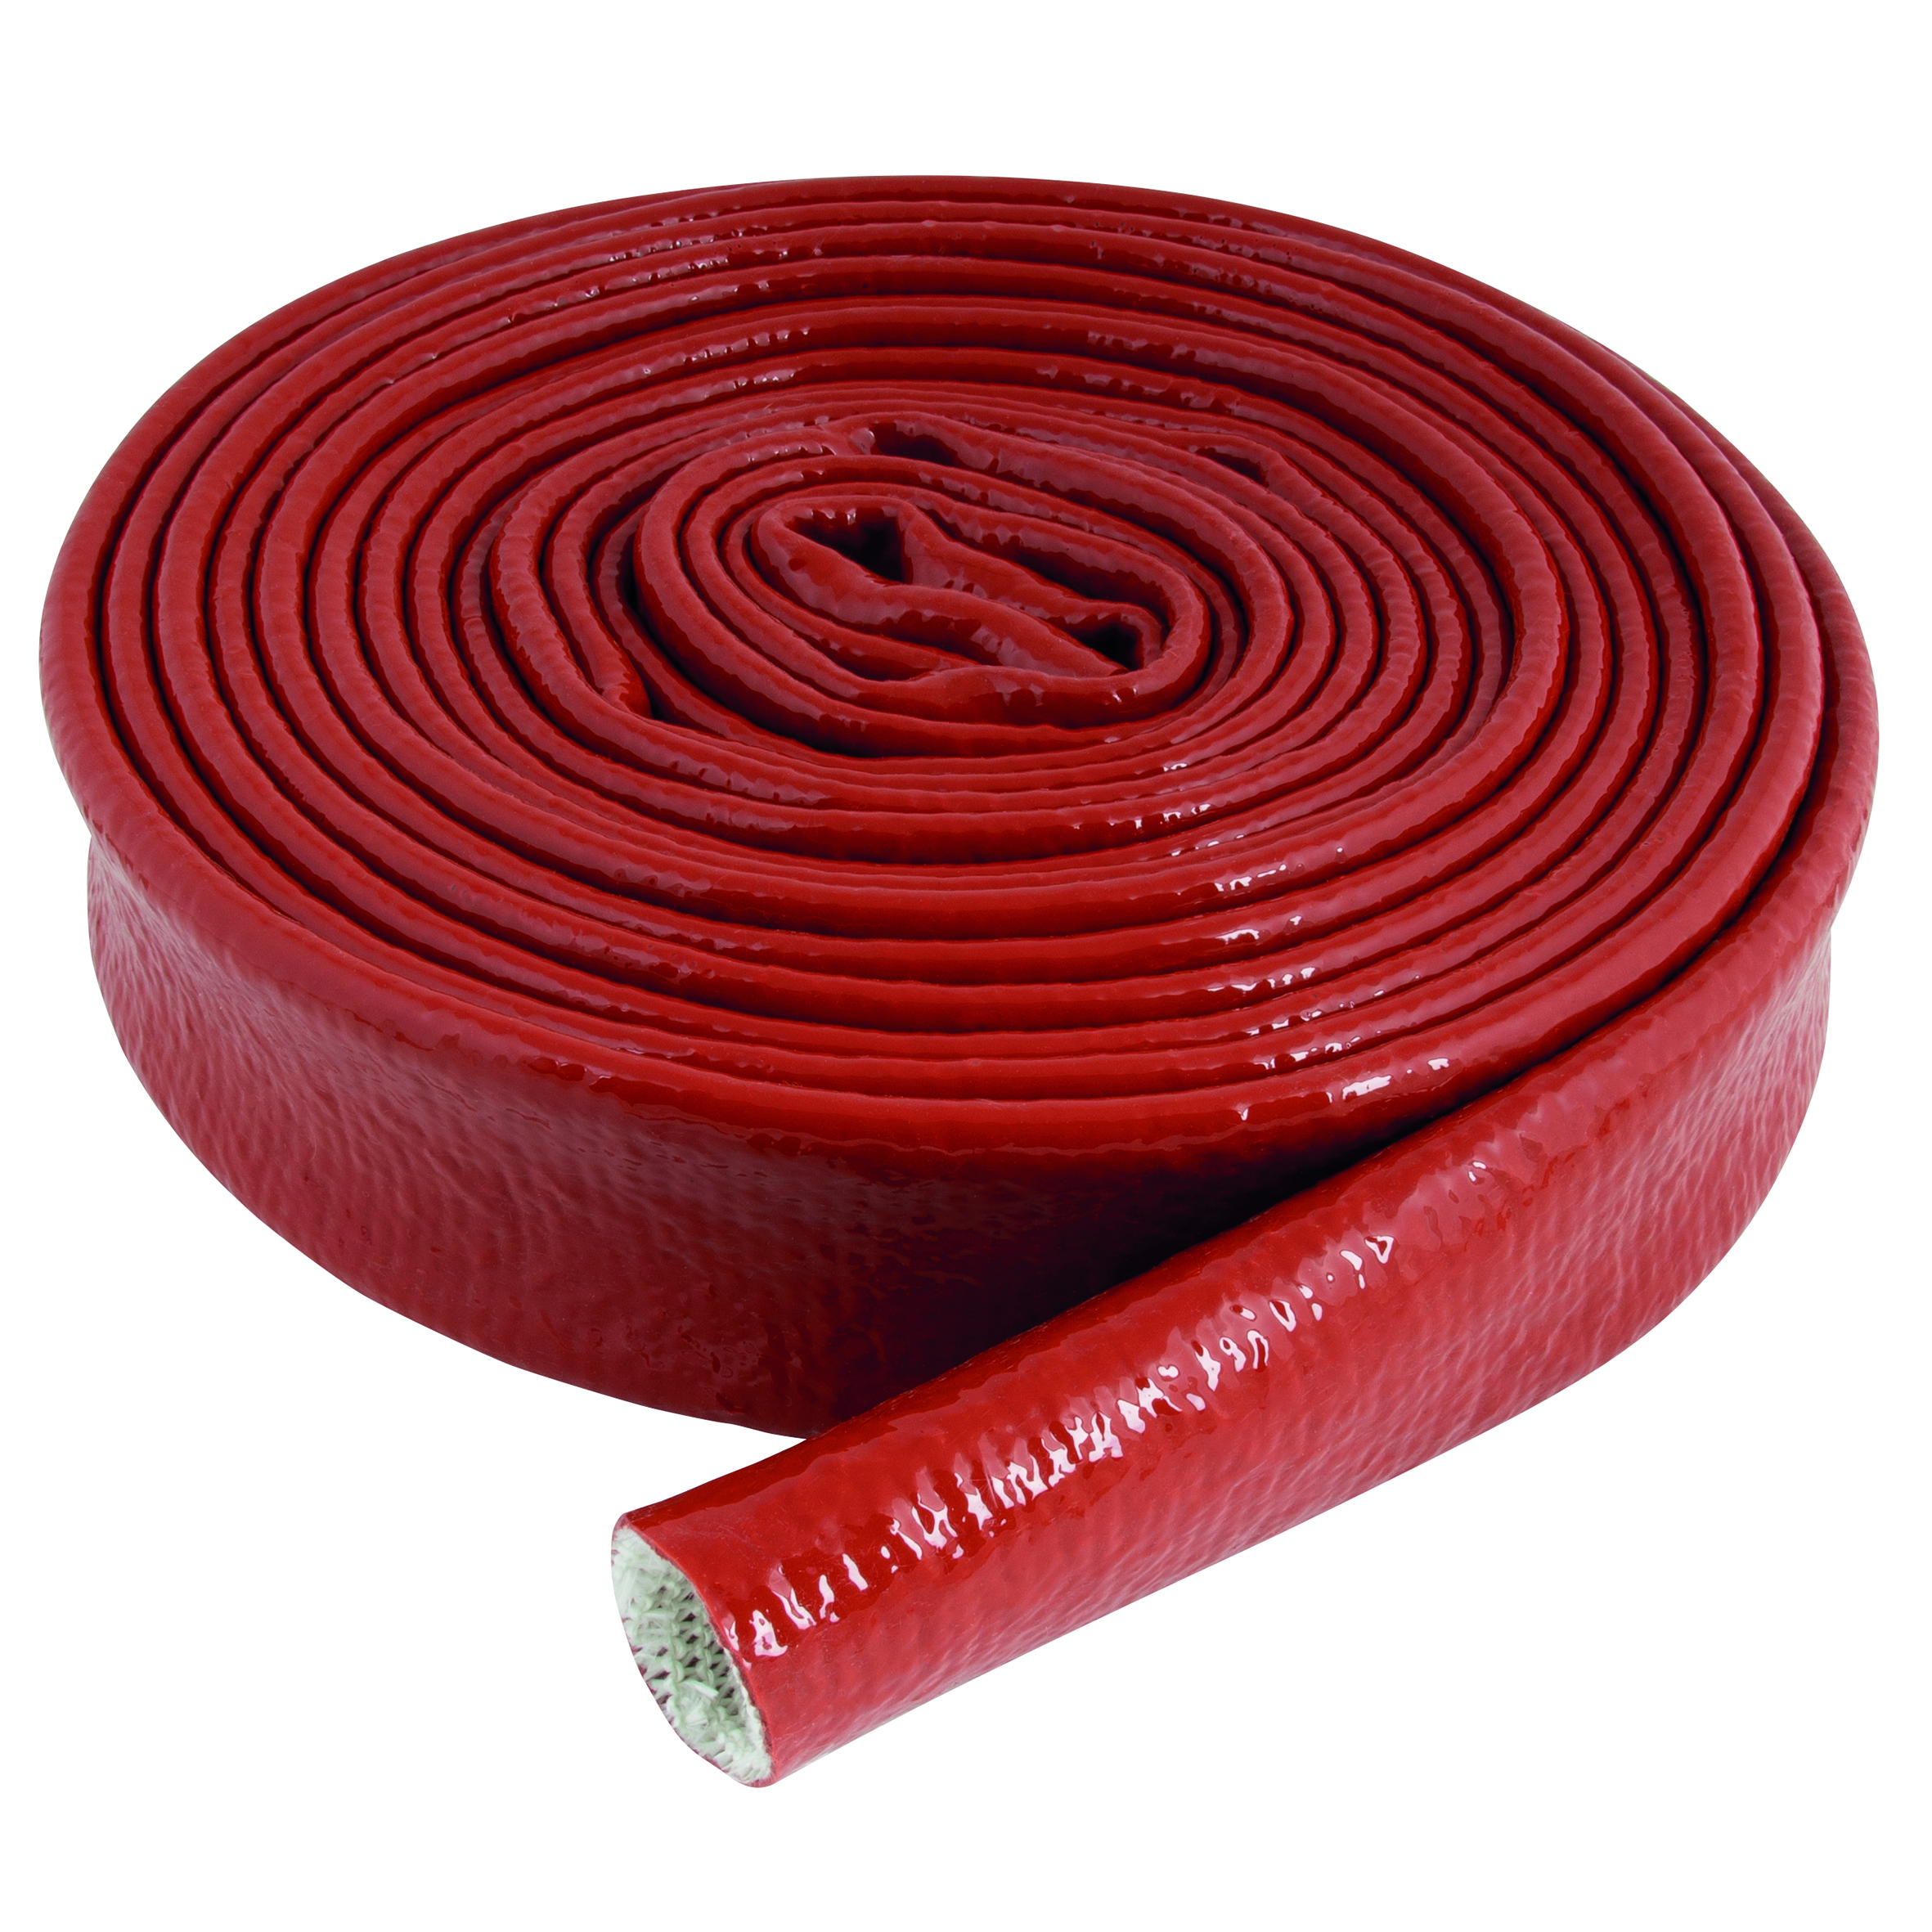 22MM ID RED COIL 15M FIRE SLEEVE